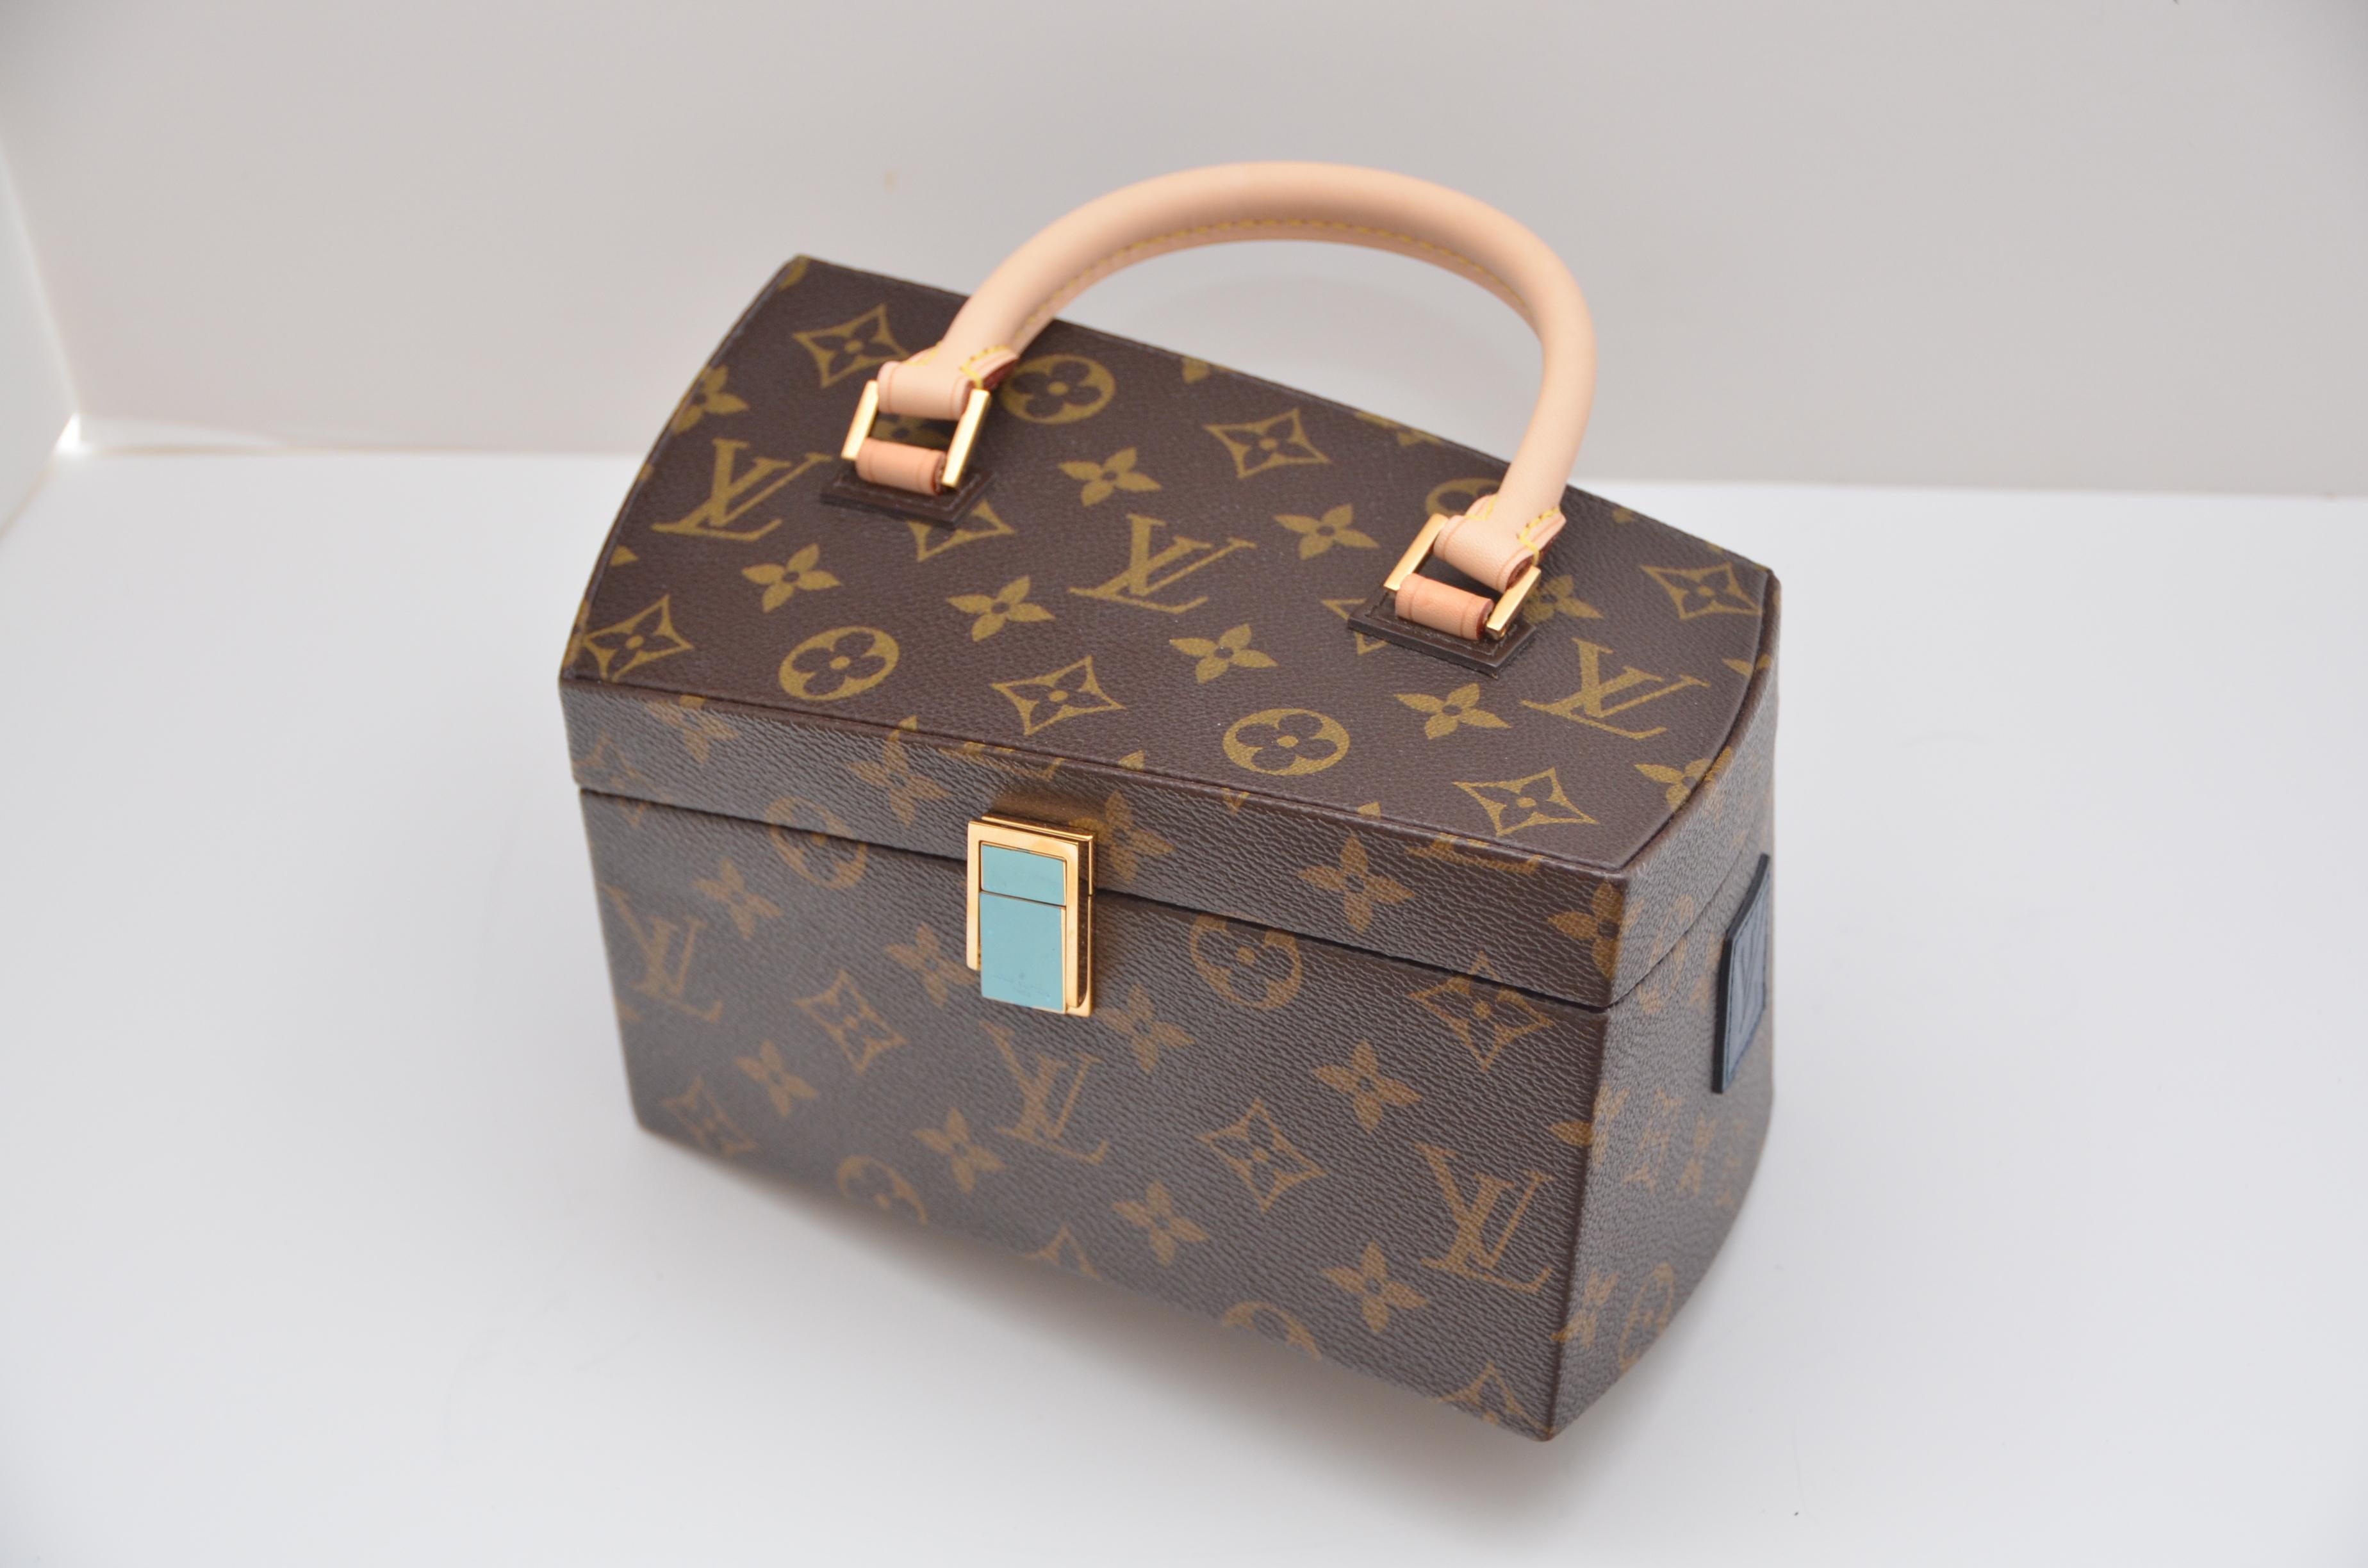 Louis Vuitton's spirit of innovation, creativity and collaboration, Karl Lagerfeld, Rei Kawakubo, Marc Newsom, Cindy Sherman, Frank Gehry, and Christian Louboutin were given free reign over Louis Vuitton's Monogram pattern to create inspired pieces